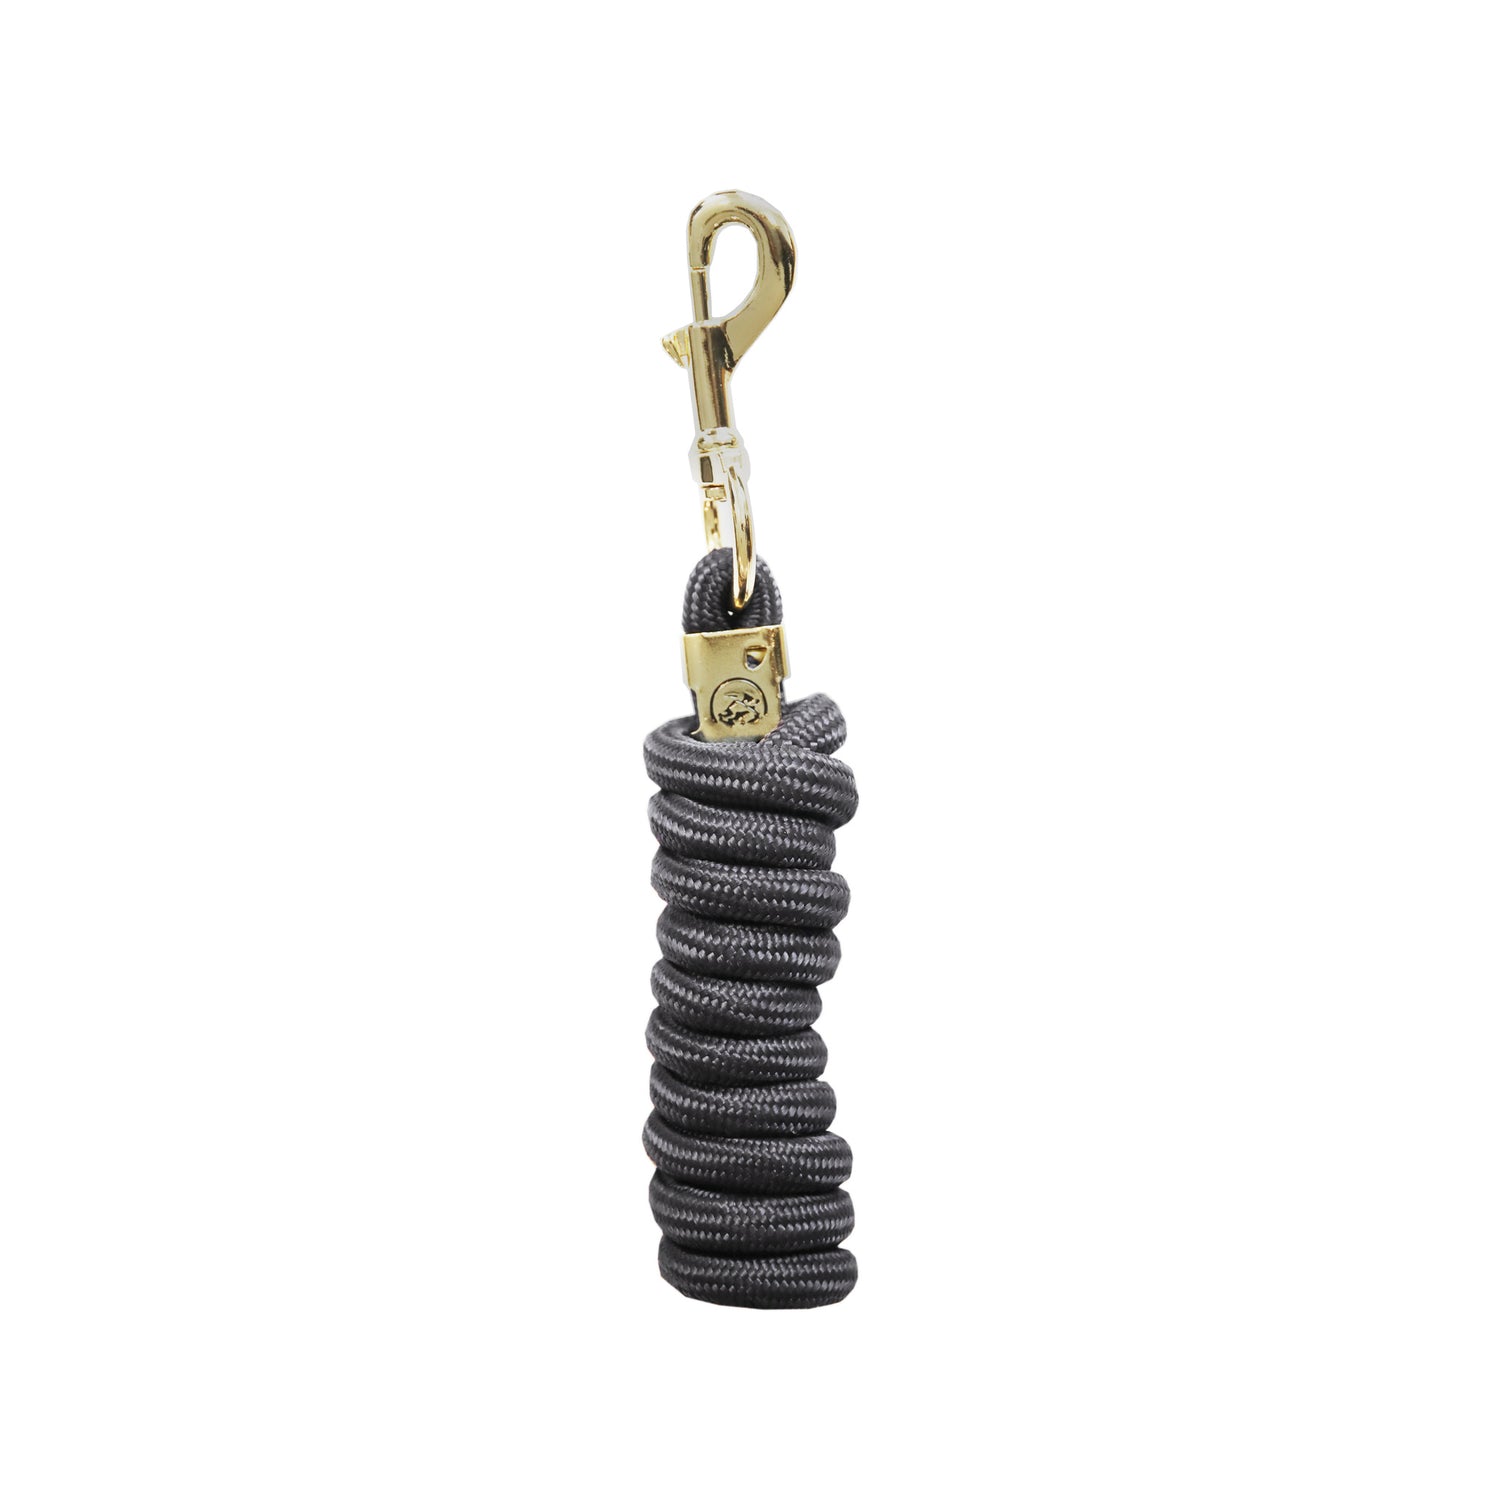 The classic Kentucky lead rope is strong and durable, yet soft for your hands. Comes with a sturdy gold clip. Available in multiple colours. 